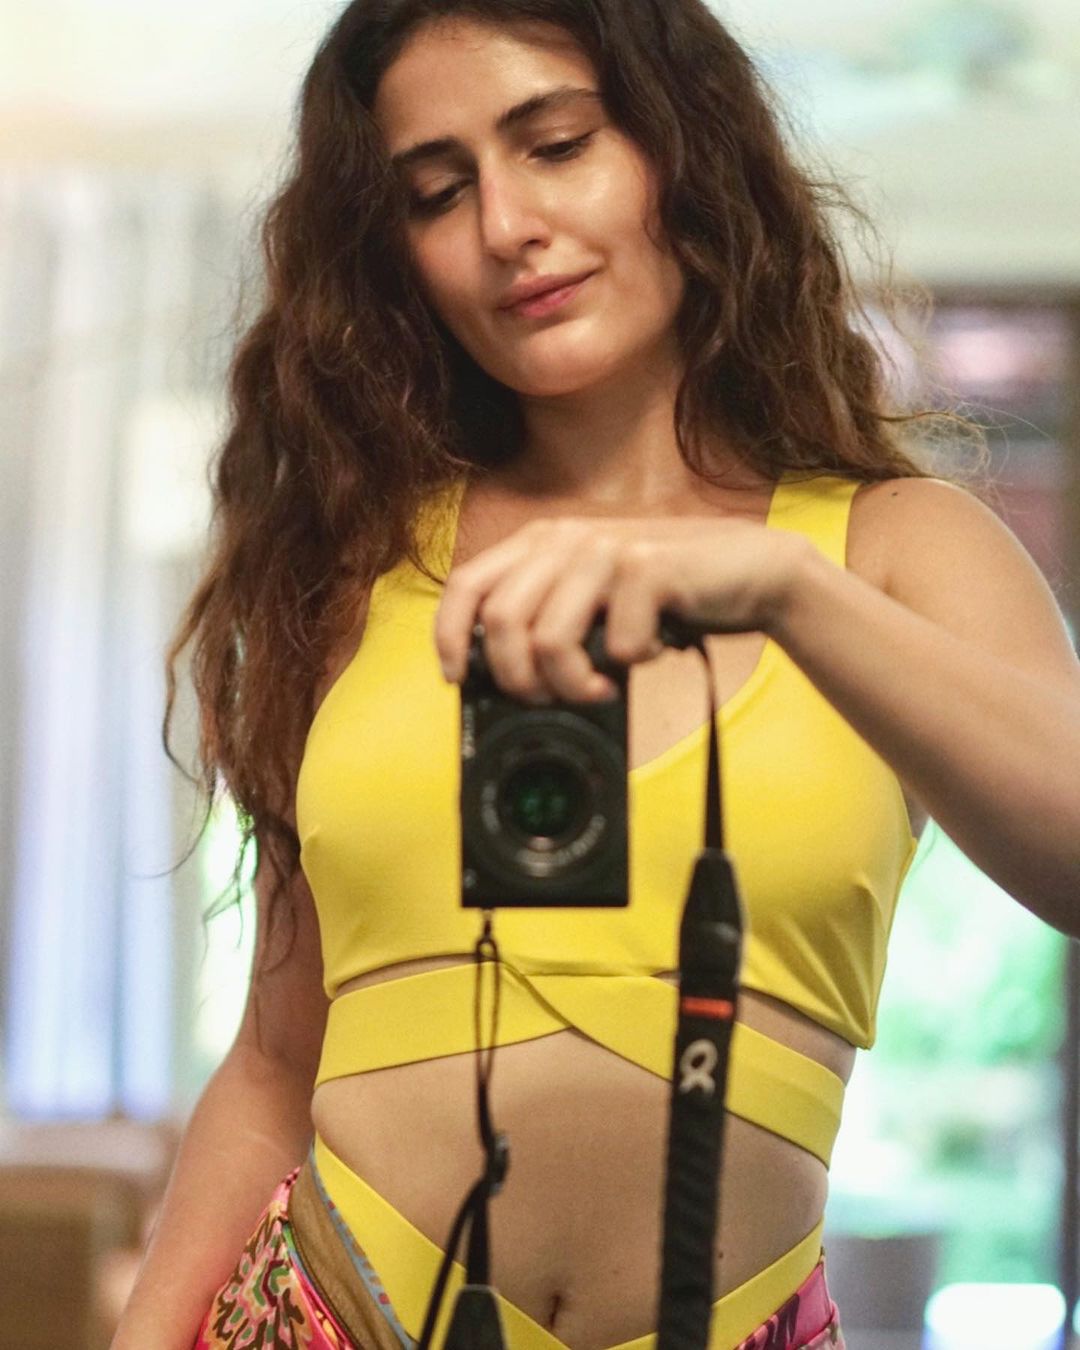 Actress fatima sana shaikh beauty is the next level-Actressfatima Photos,Spicy Hot Pics,Images,High Resolution WallPapers Download